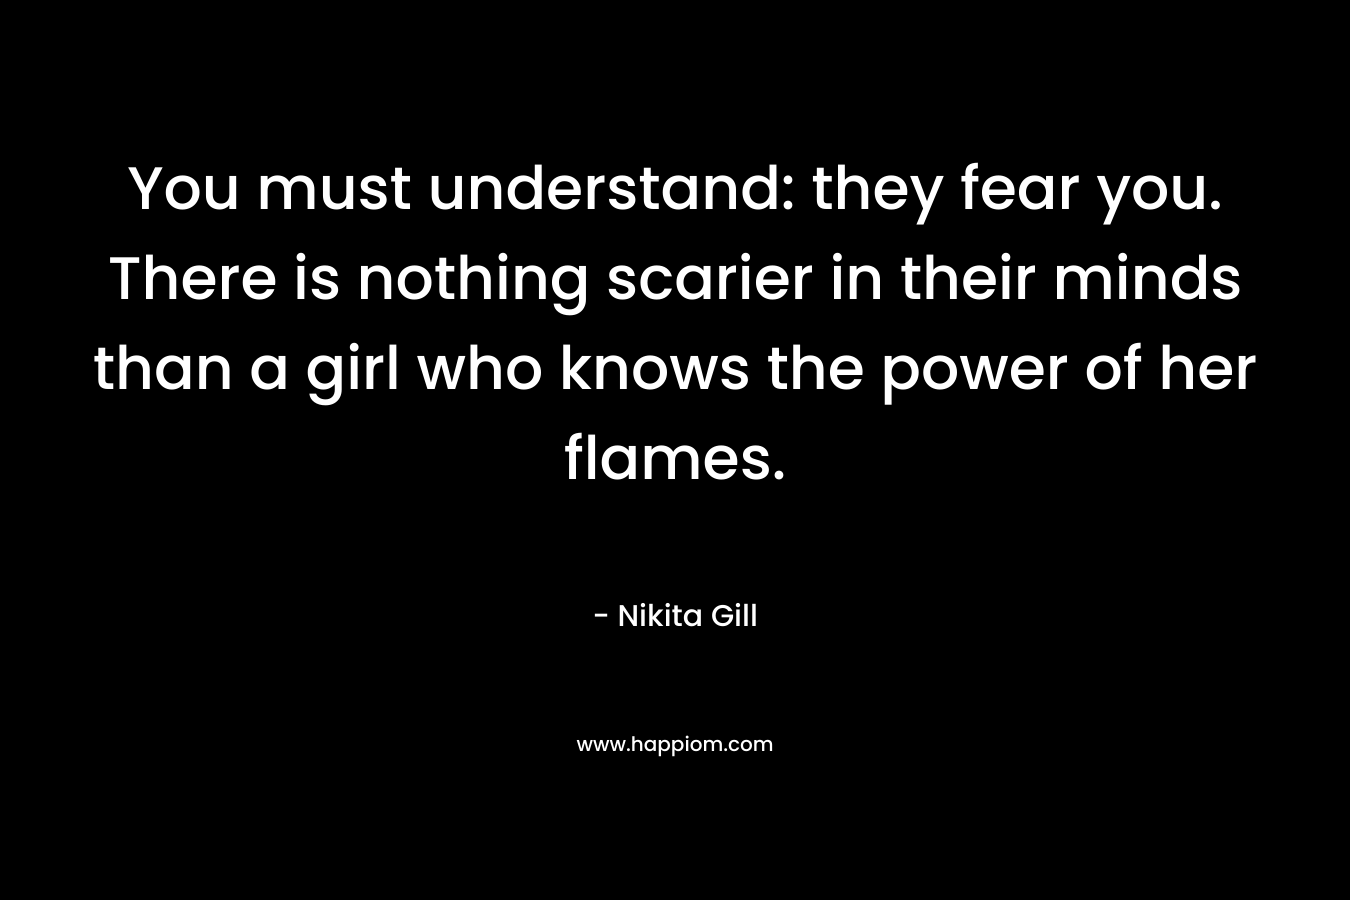 You must understand: they fear you. There is nothing scarier in their minds than a girl who knows the power of her flames.